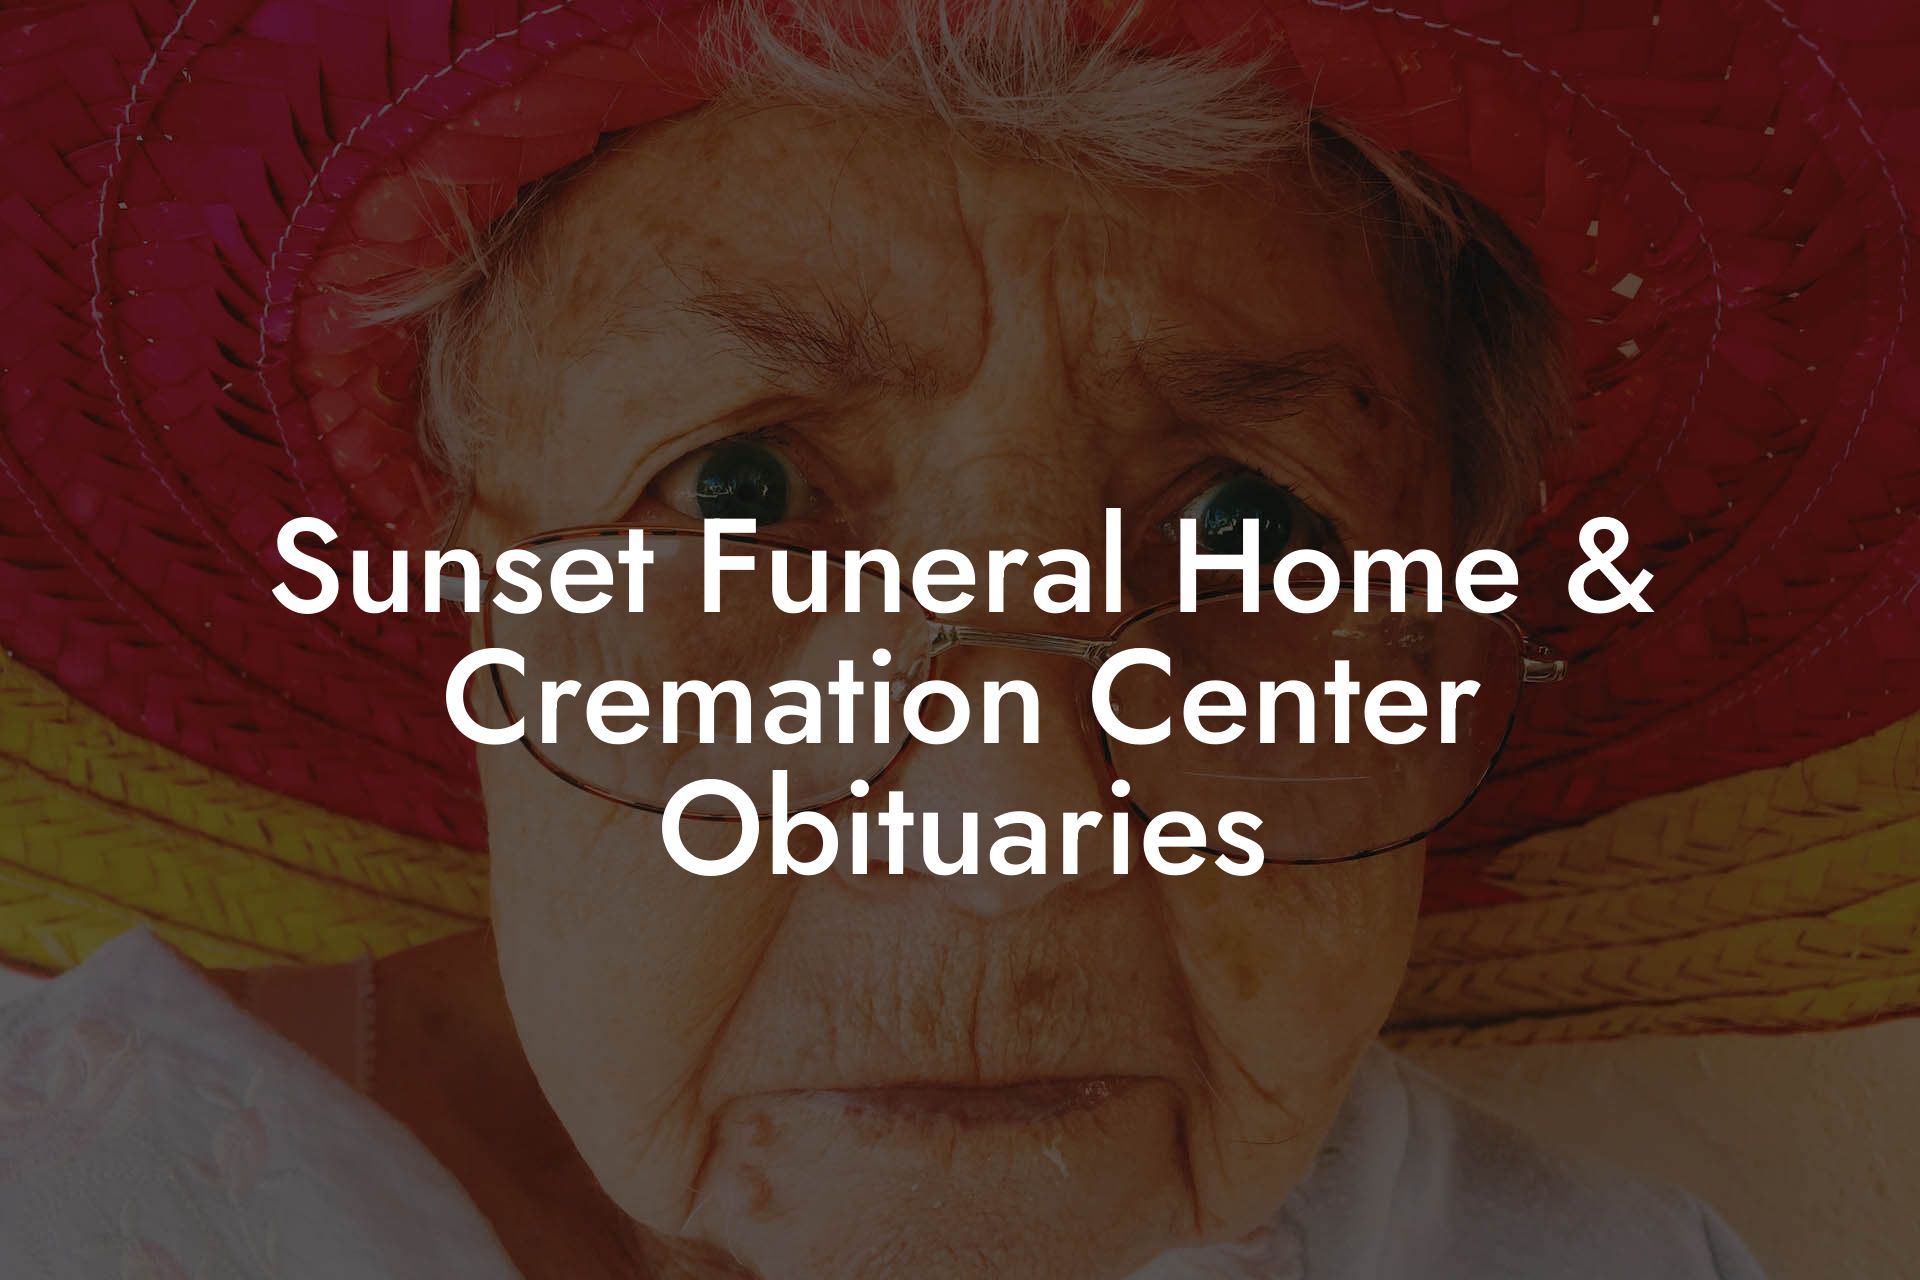 Sunset Funeral Home & Cremation Center Obituaries